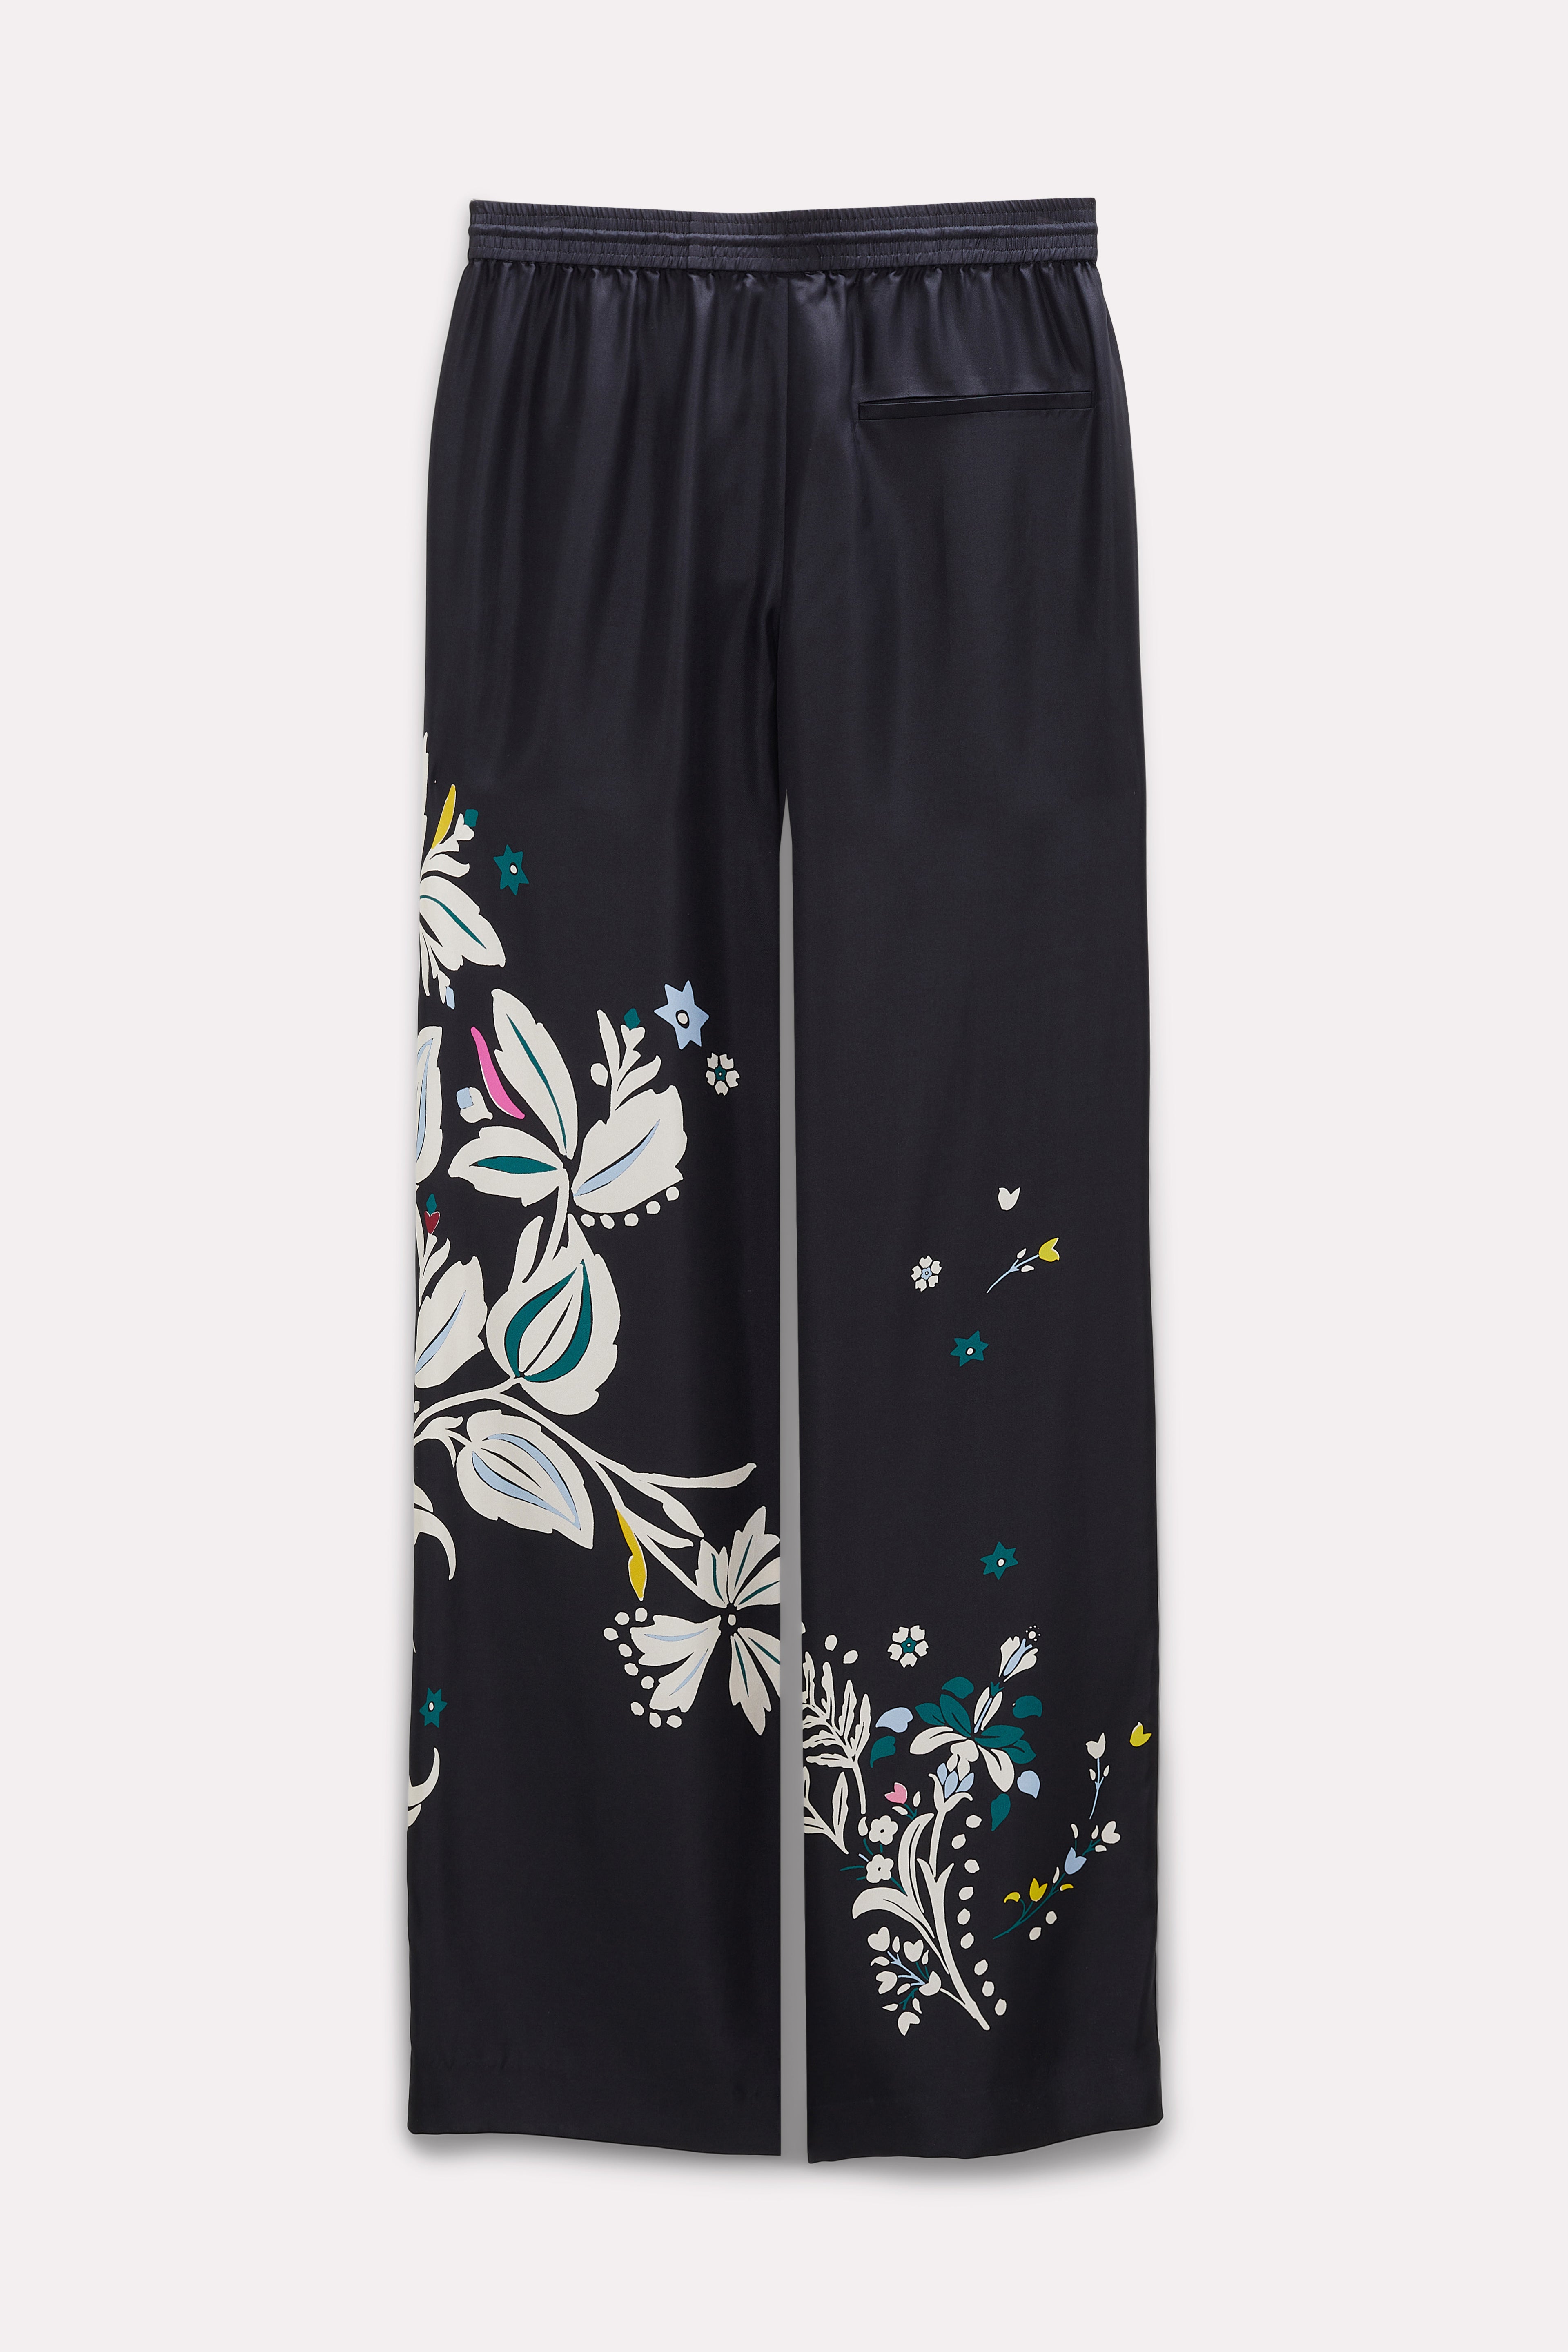 Dorothee-Schumacher-OUTLET-SALE-FLOWER-WHIRL-pants-Hosen-ARCHIVE-COLLECTION-2_0523bae7-6622-4da6-930a-4b808abfc9f6.jpg